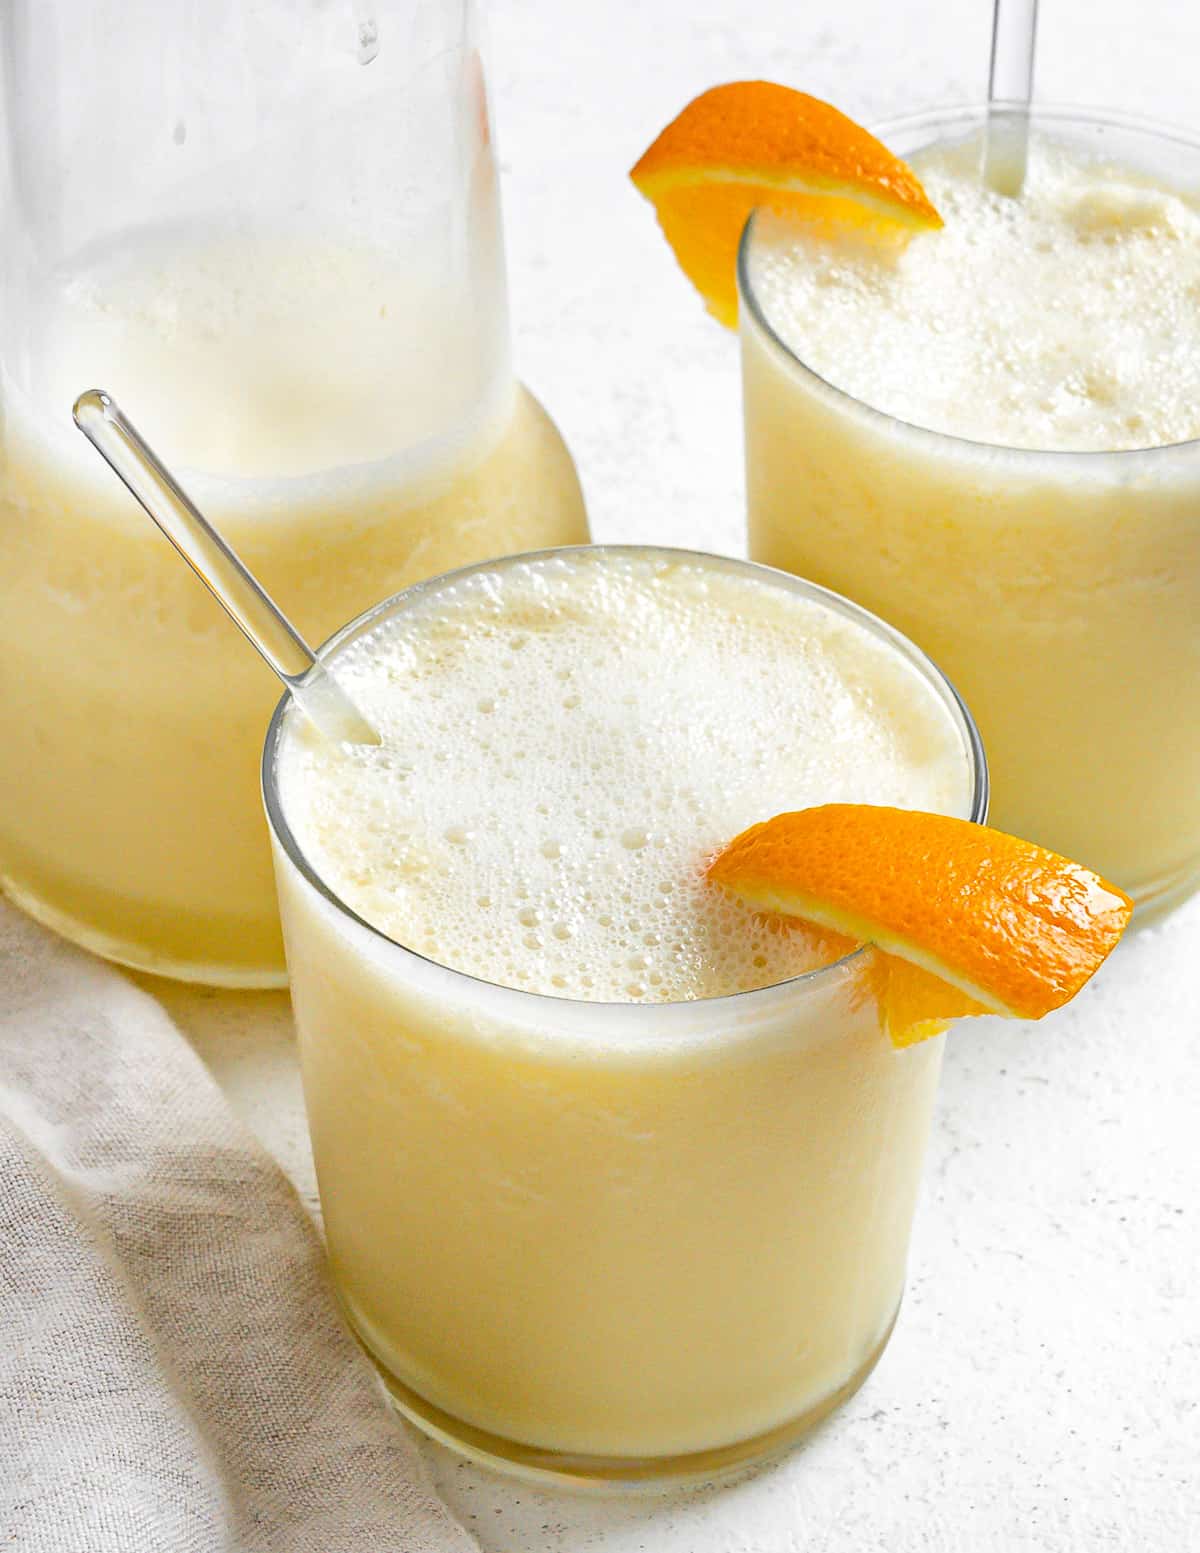 two completed Easy Orange Julius Smoothies in glass cups with a pitcher in the background